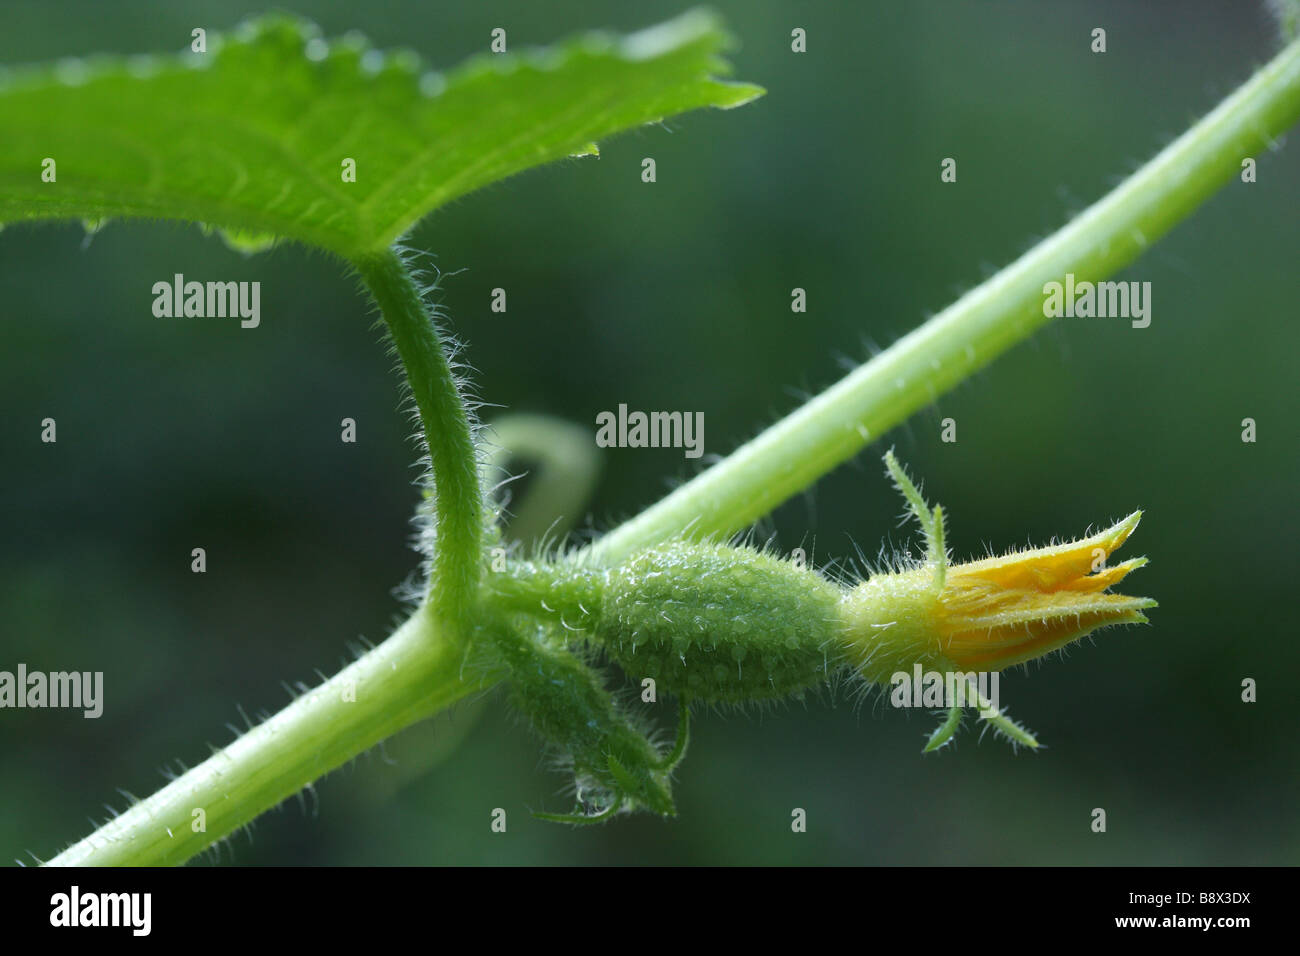 A developing Zucchini with flower on the vine Stock Photo